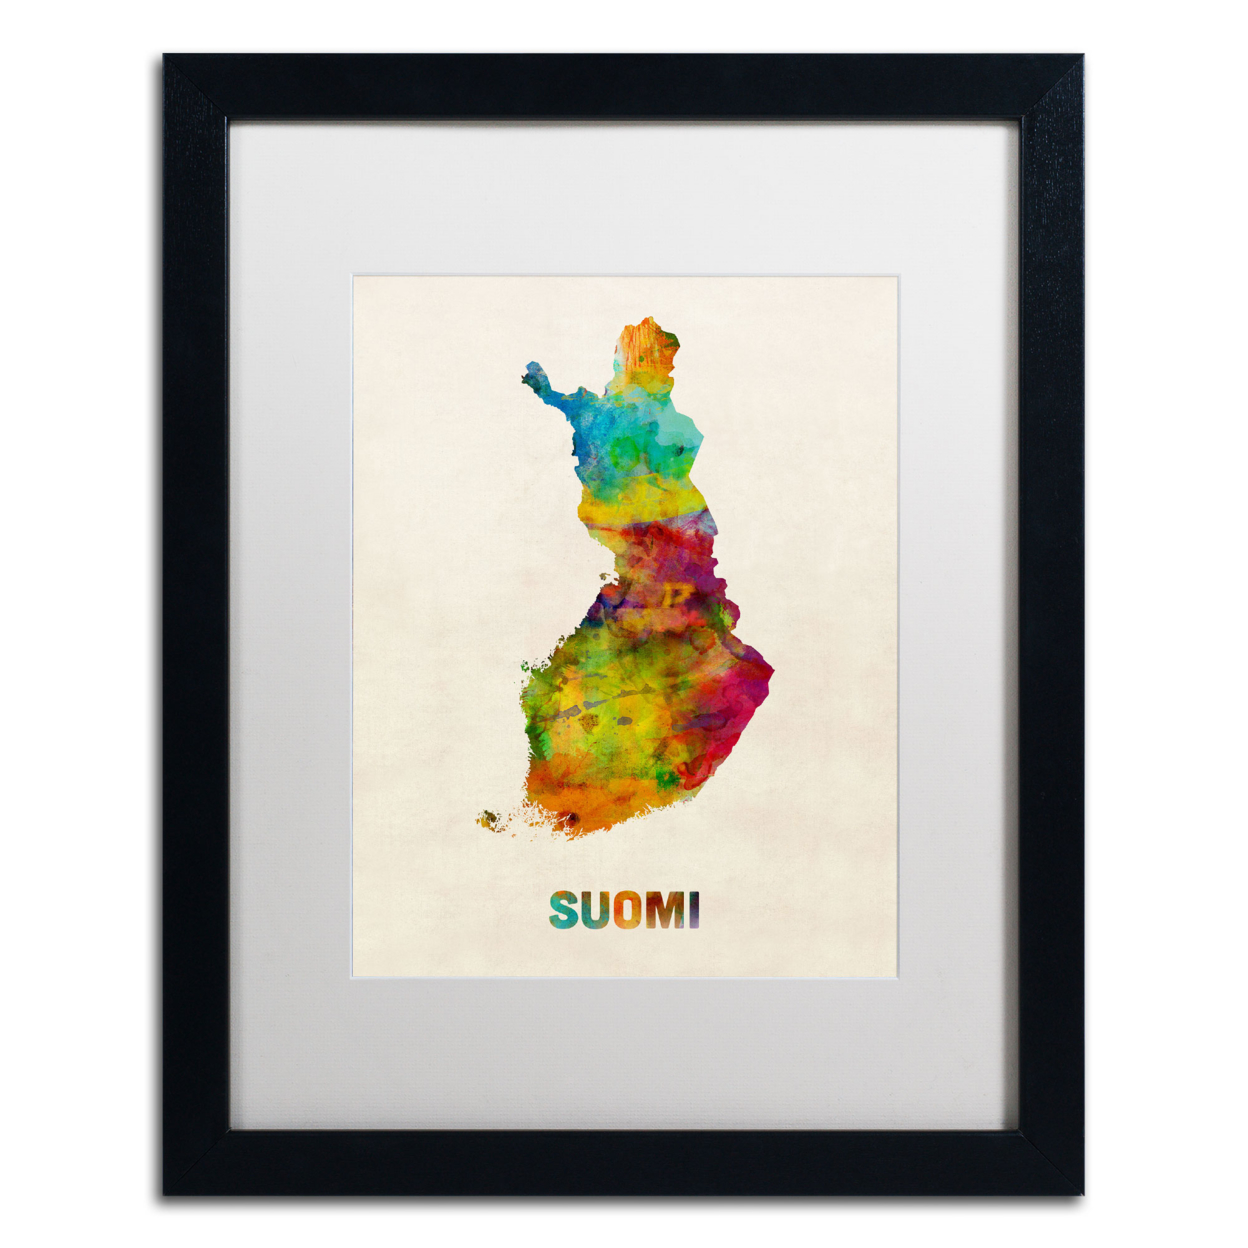 Michael Tompsett 'Finland Watercolor Map (Suomi)' Black Wooden Framed Art 18 X 22 Inches